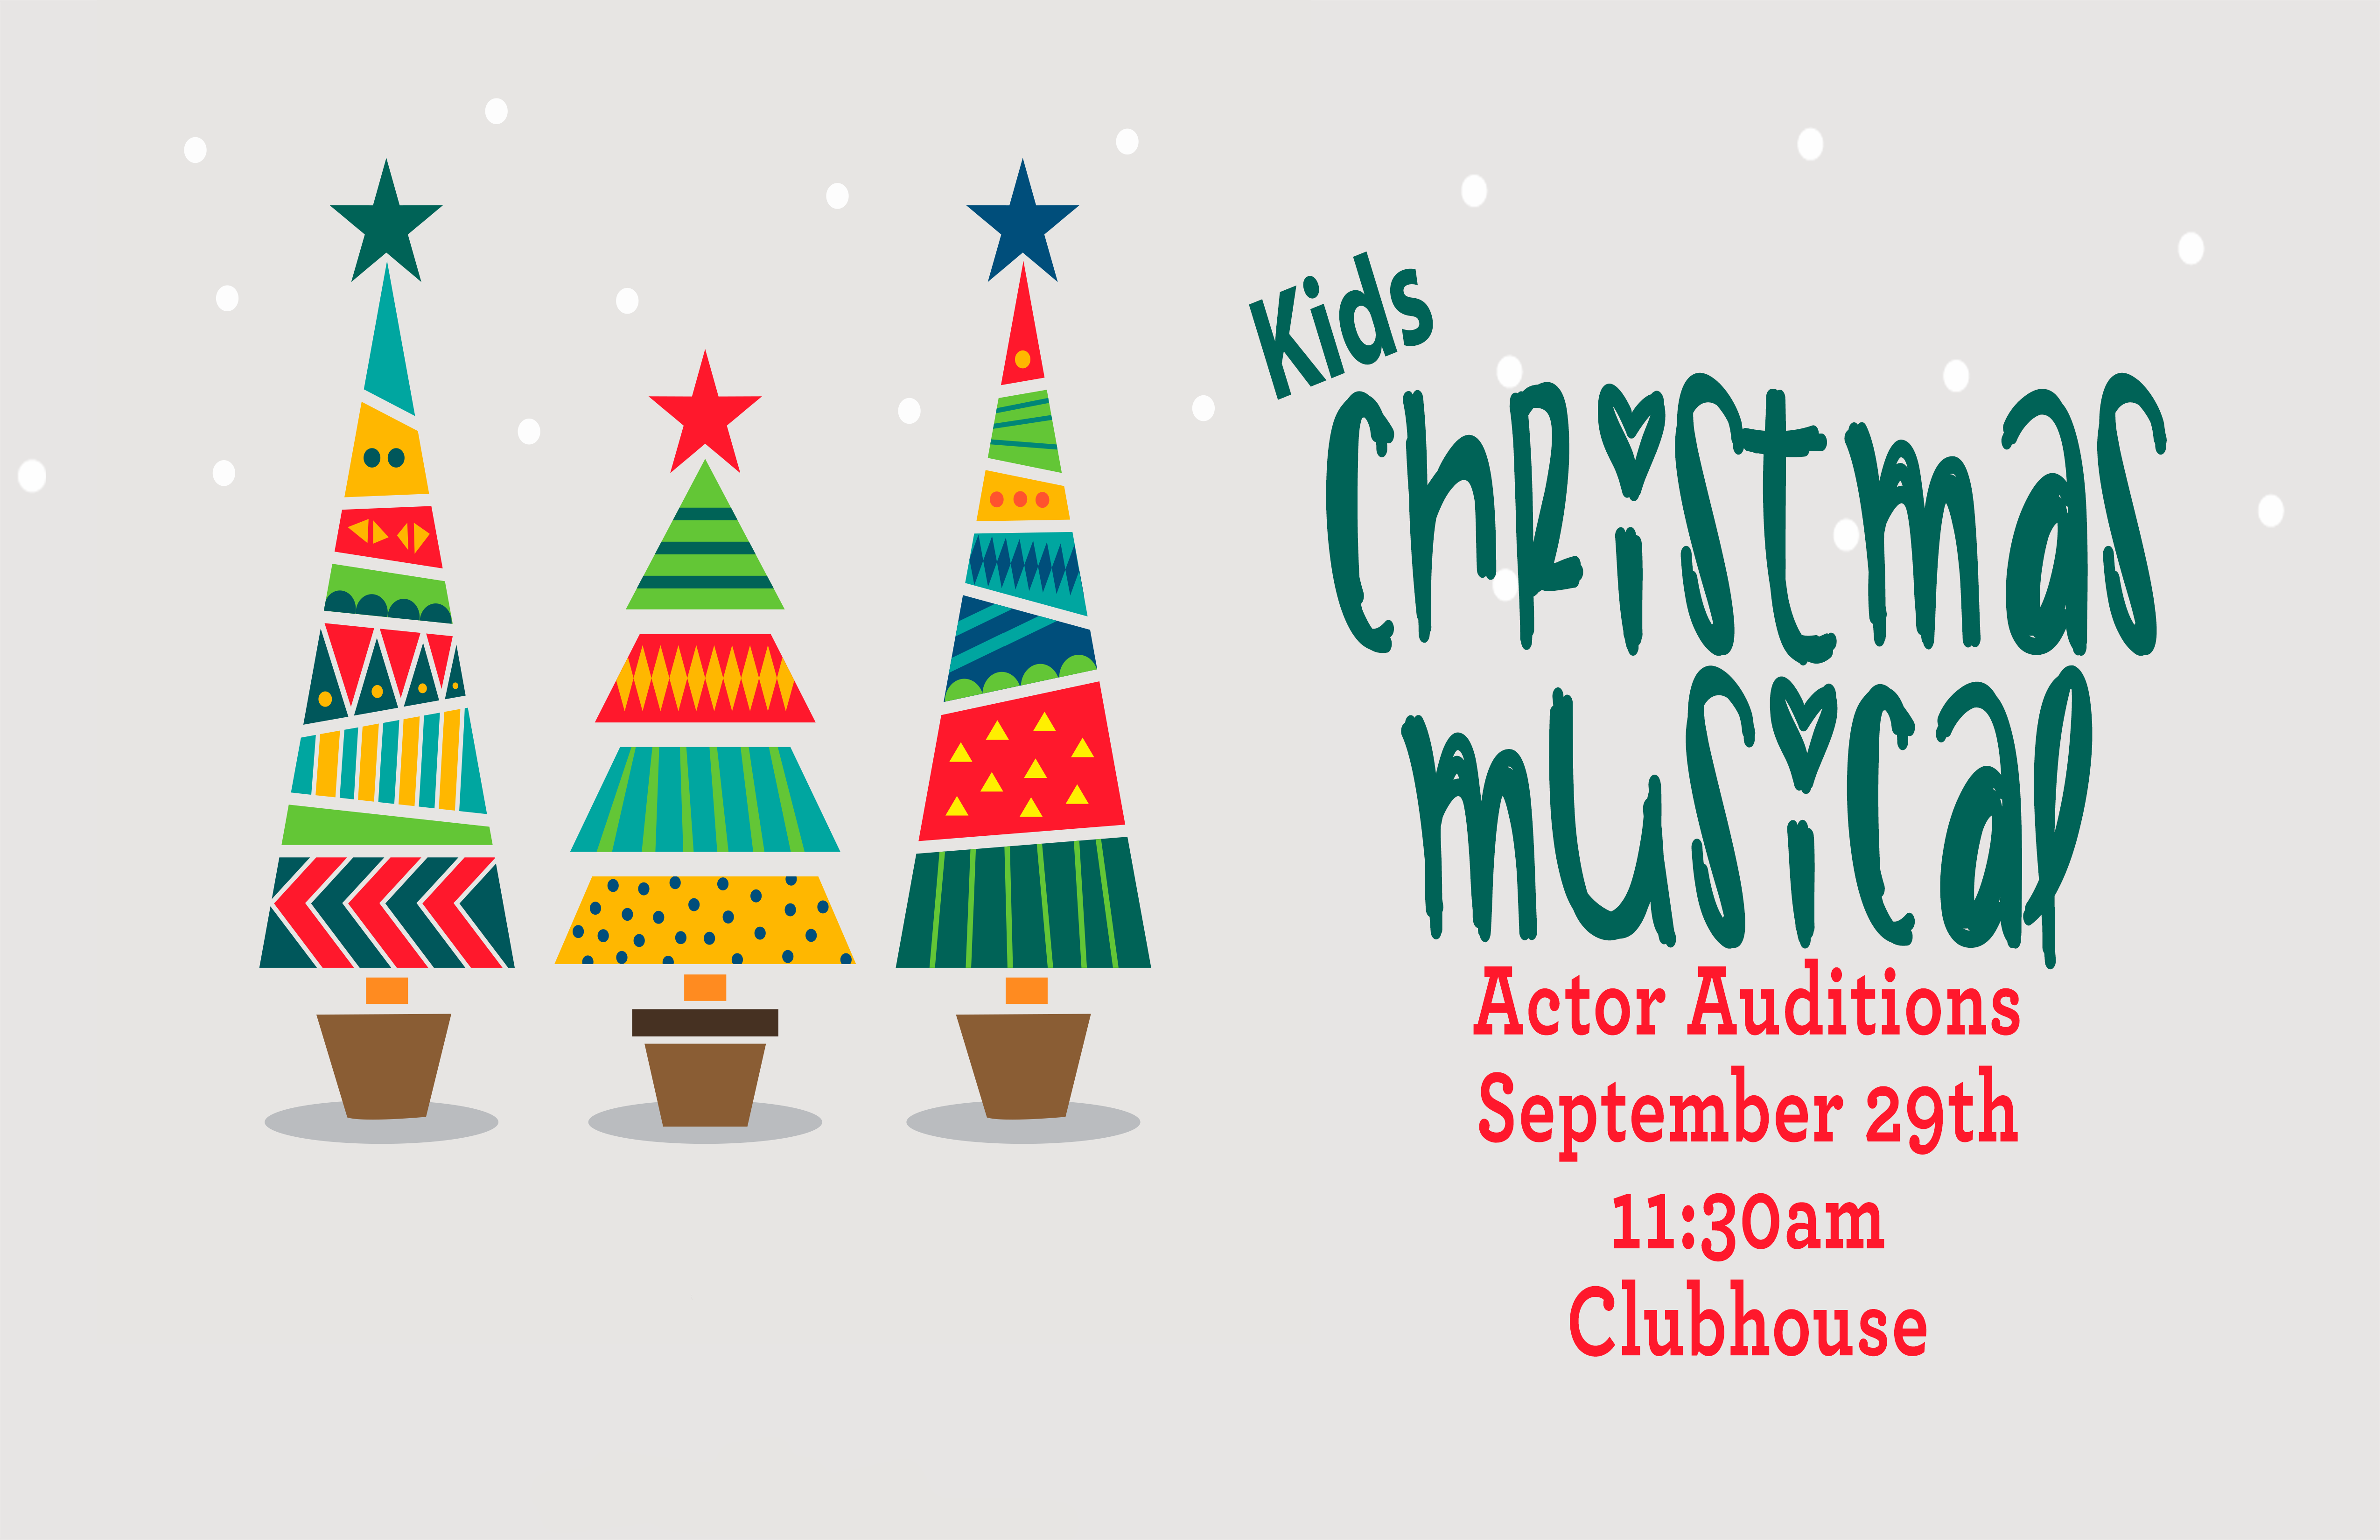 Actor Auditions Christmas Musical image